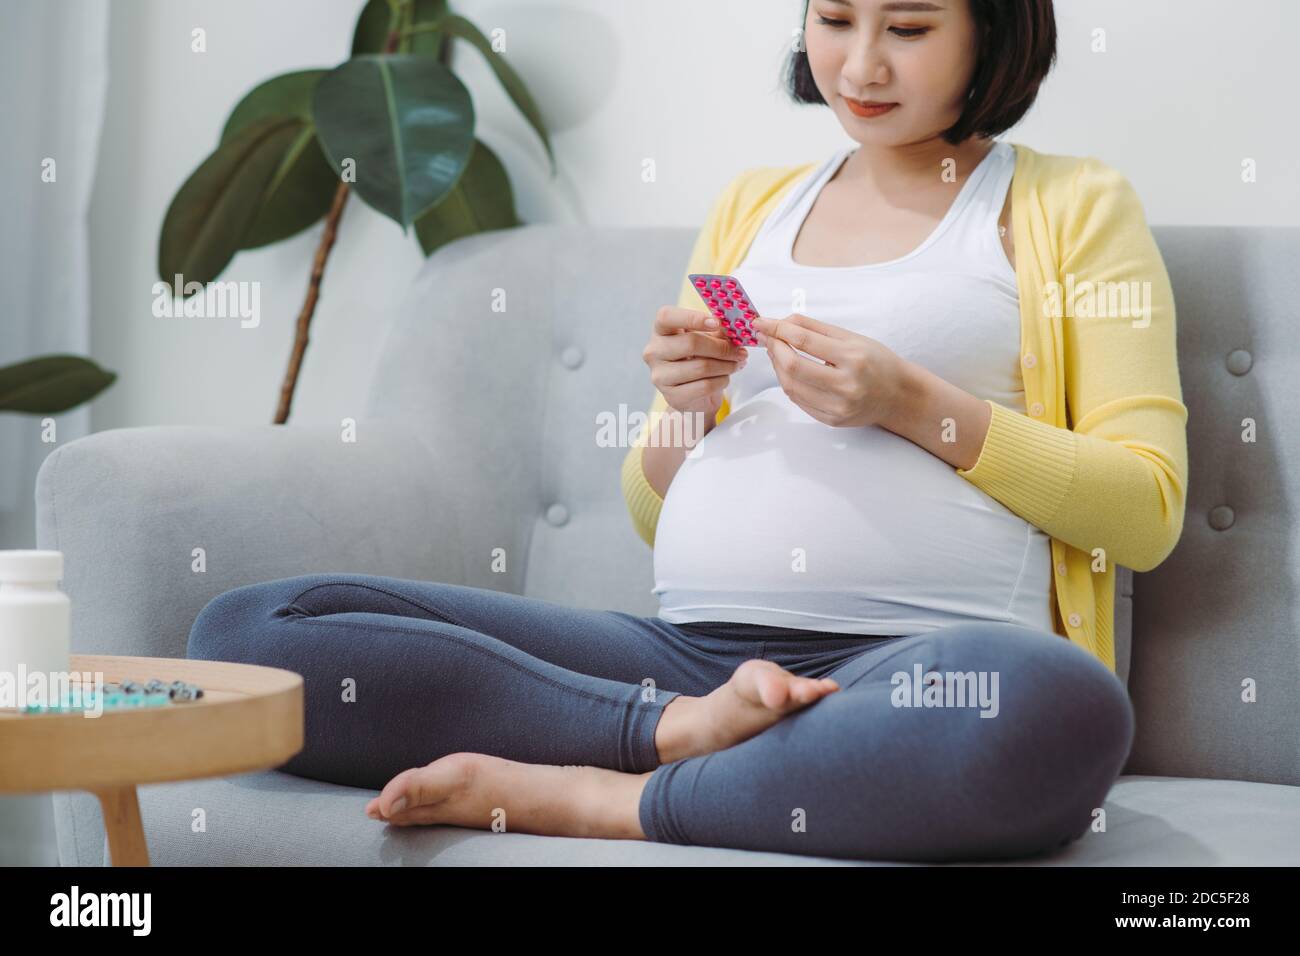 Woman hands read how to use birth control pills in hand Stock Photo